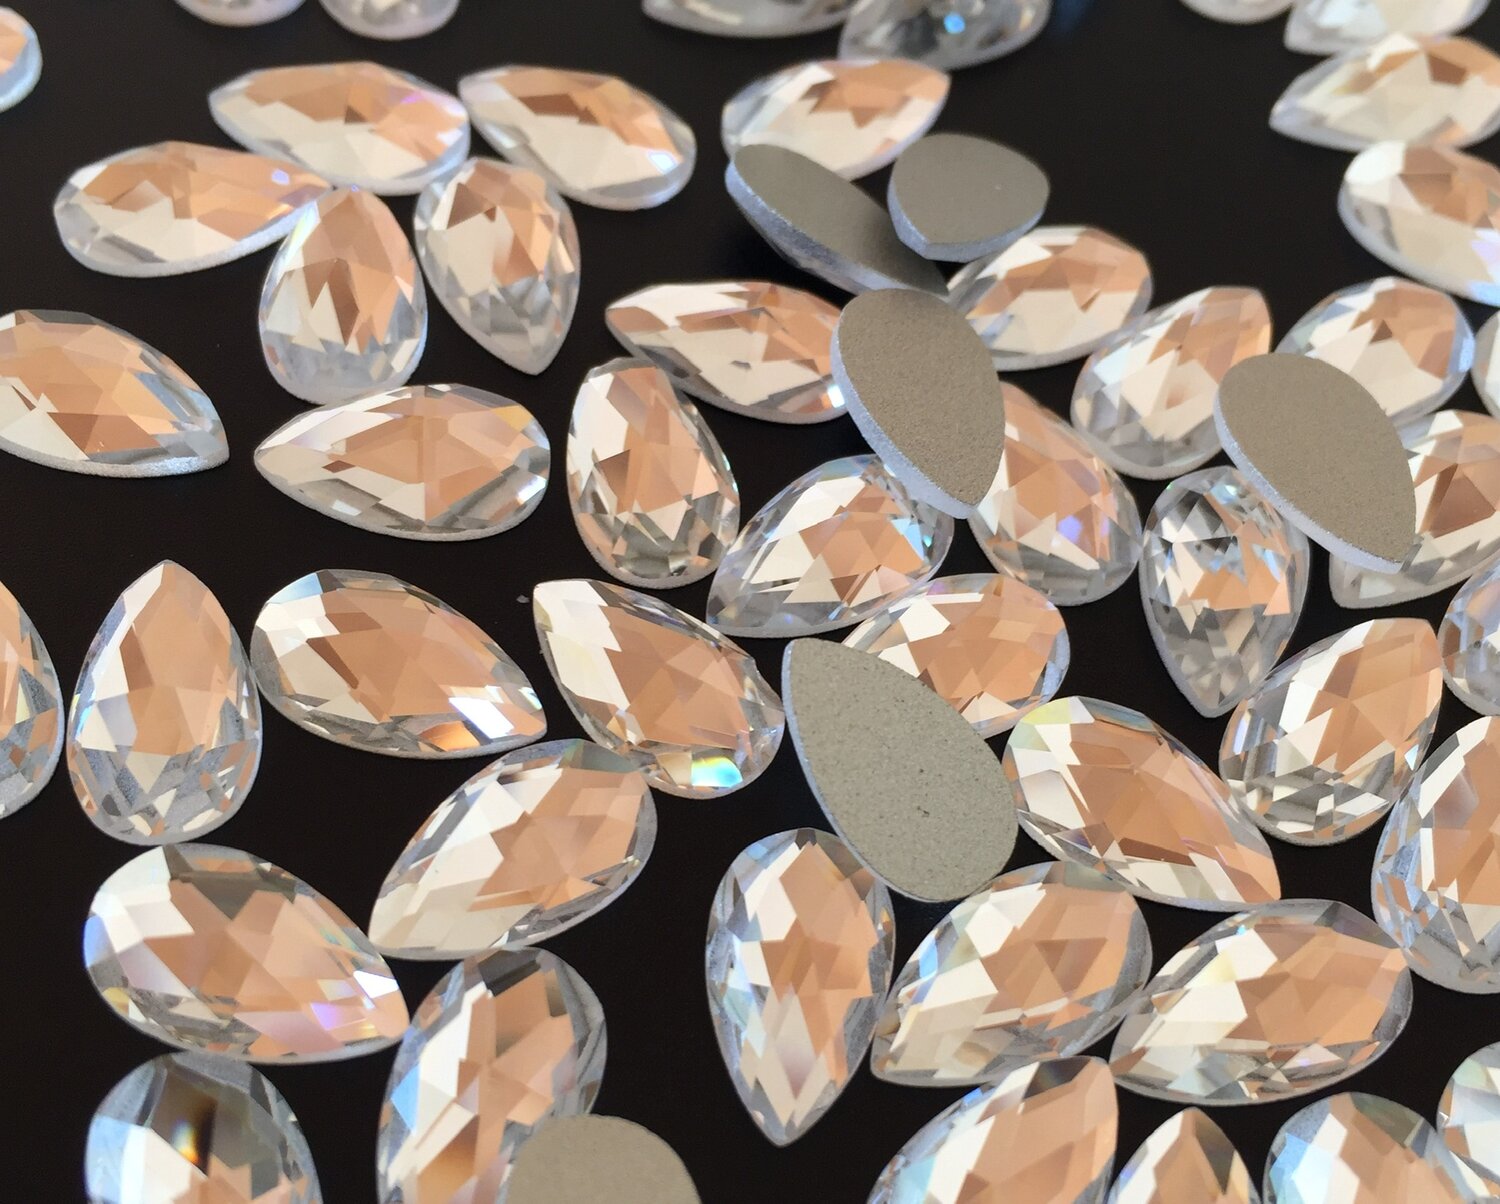 Looking Glass Gems